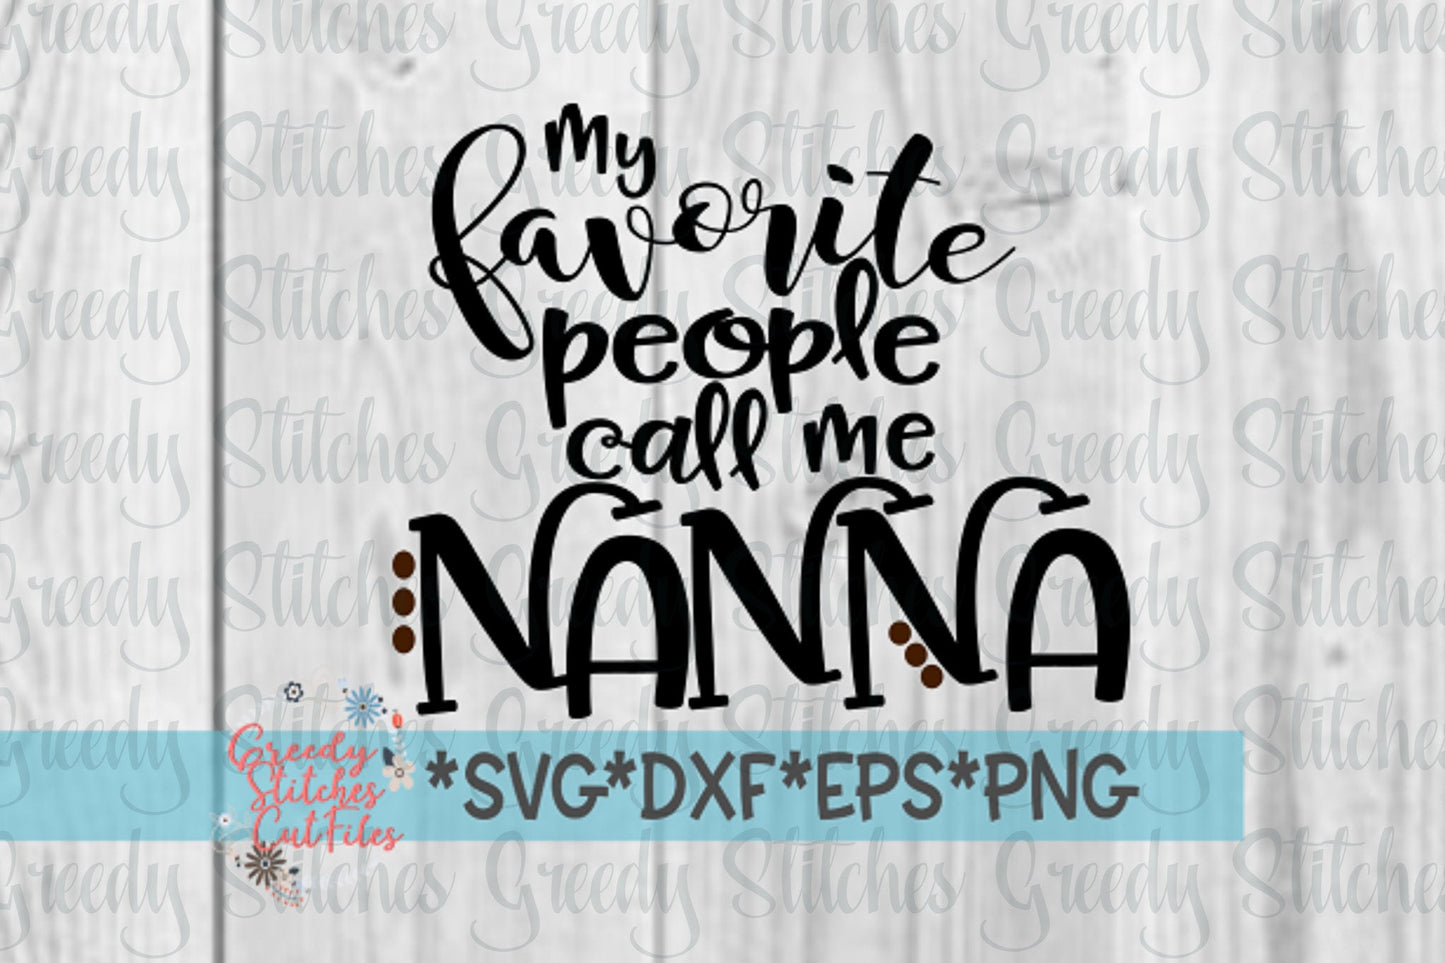 My Favorite People Call Me Nanna | Mother&#39;s Day SVG | Mother&#39;s Day | Nanna SVG | Nanna svg, dxf, eps, png. Instant Download Cut File.